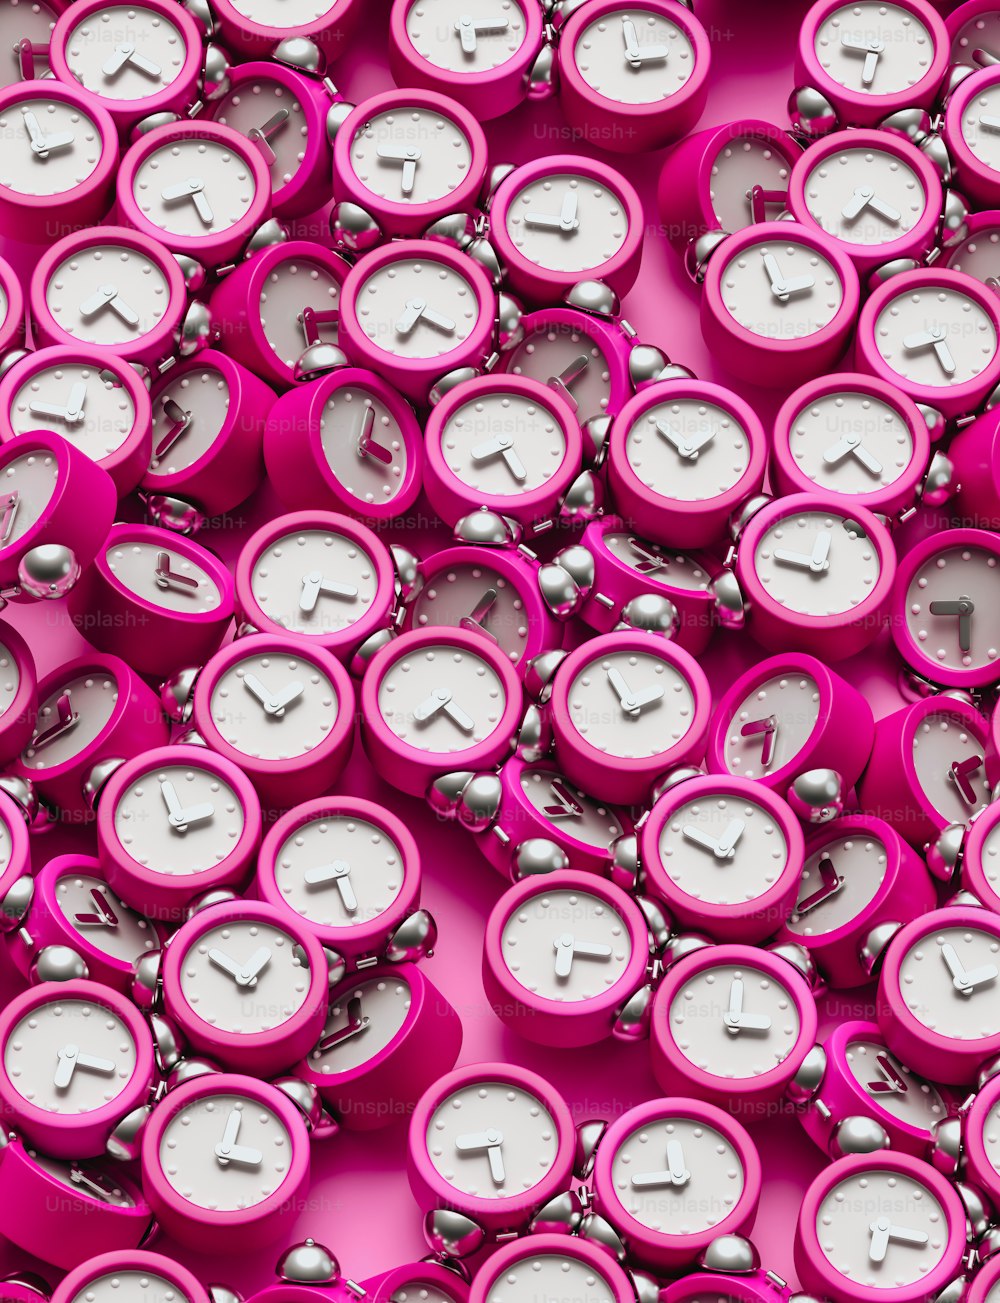 a lot of clocks that are pink and white